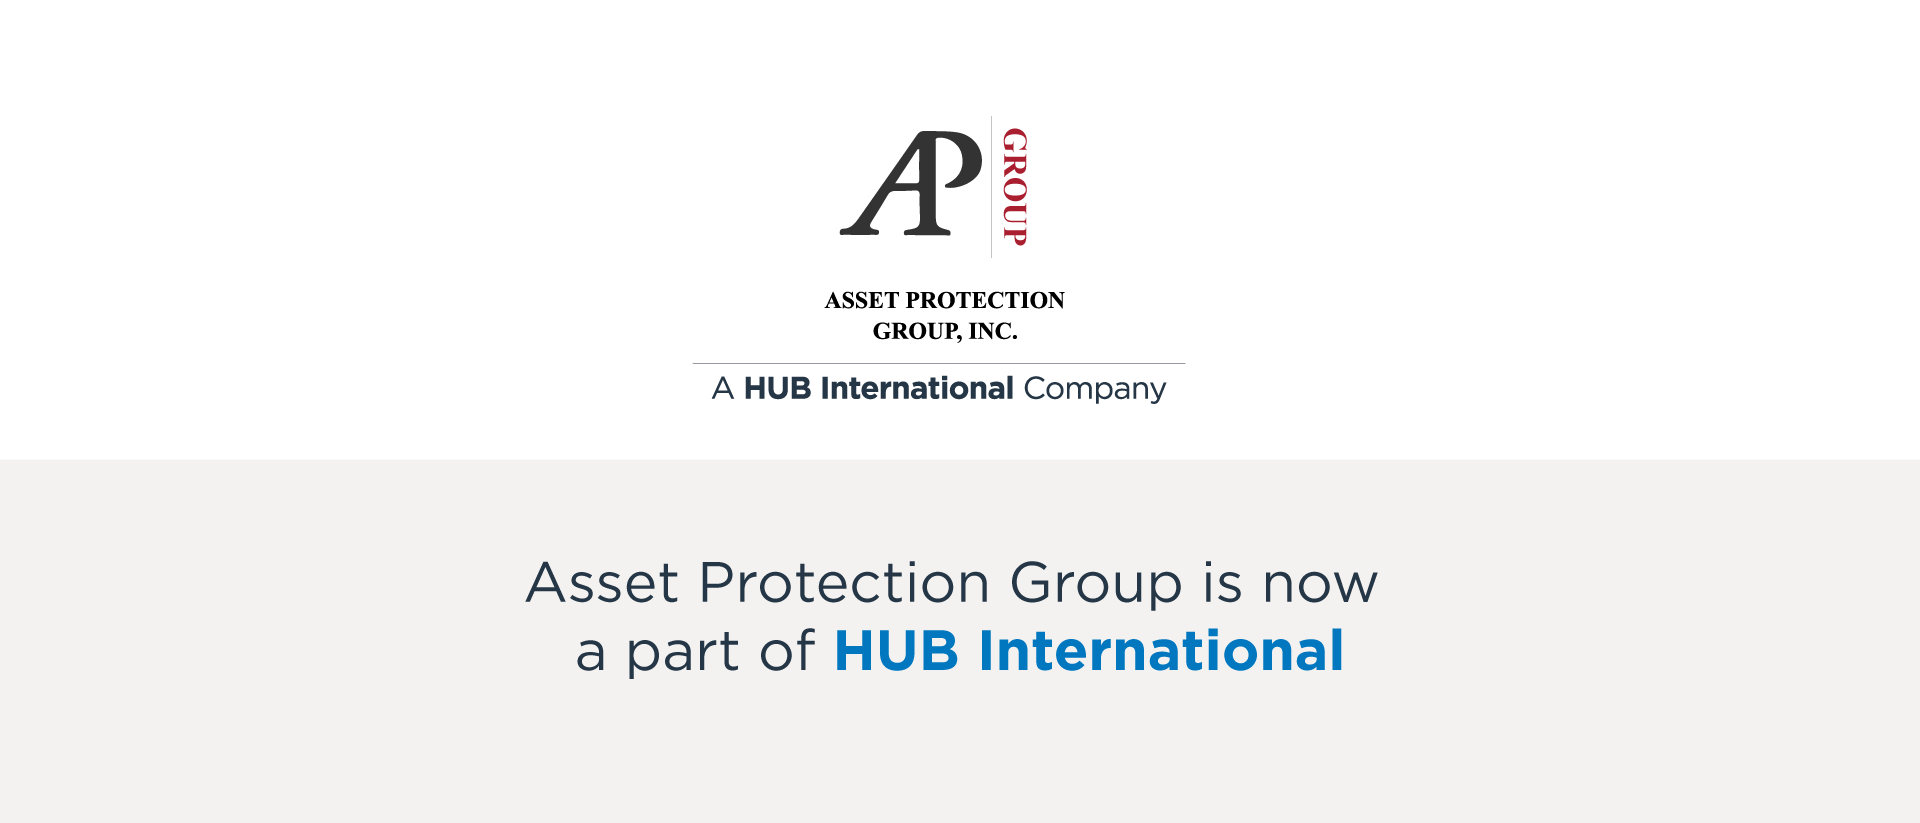 Asset Protection Group is now a part of HUB International